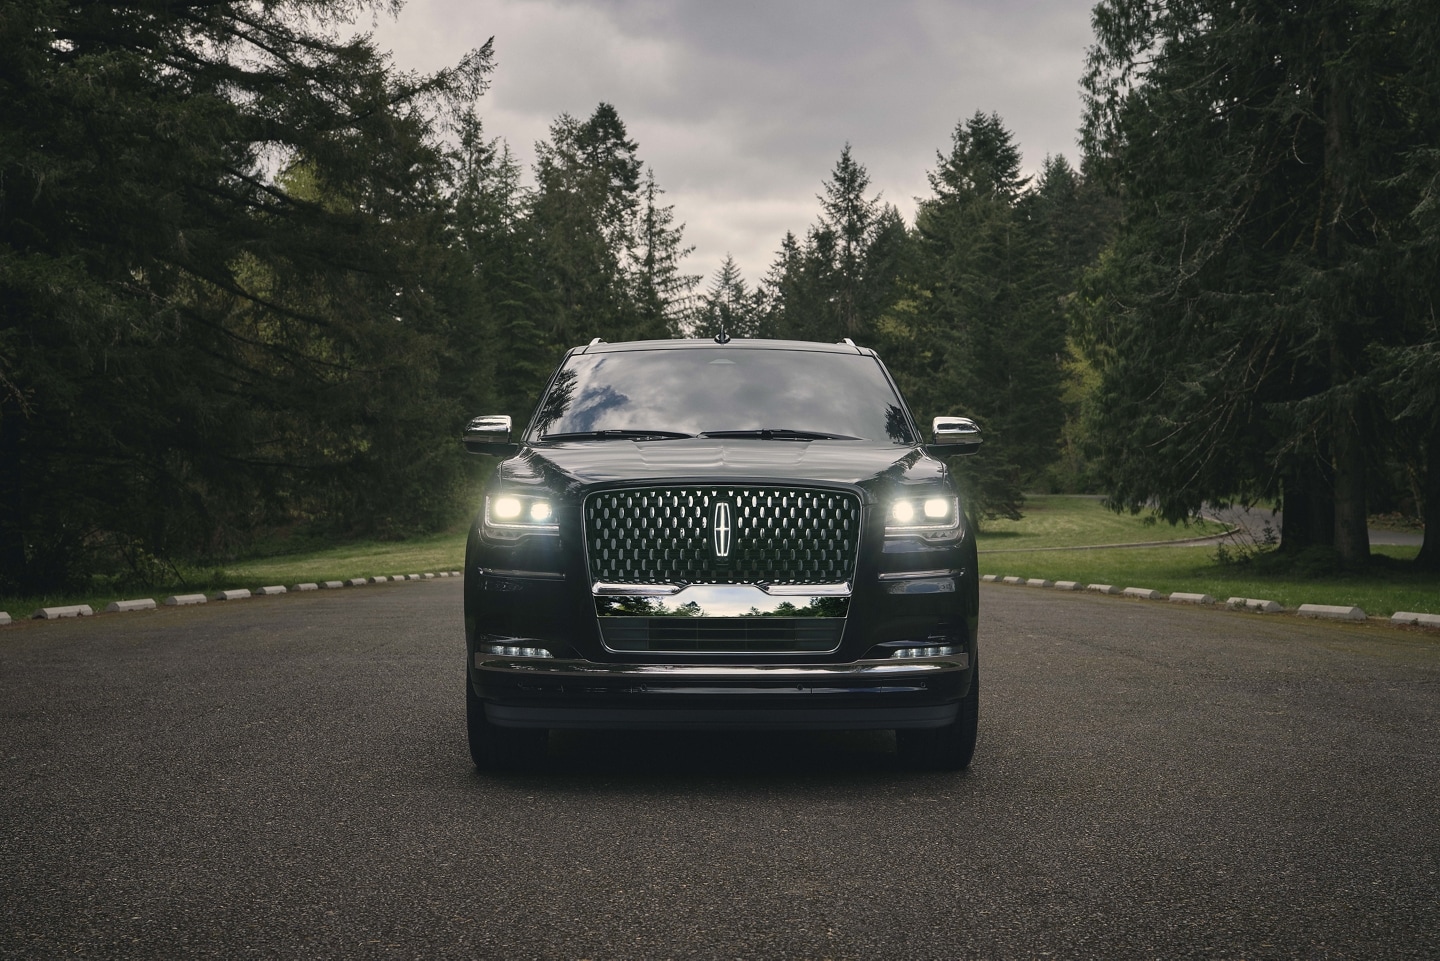 Front view of black 2022 Lincoln Navagator, one the Consumer Reports most reliable luxury SUVs for large families